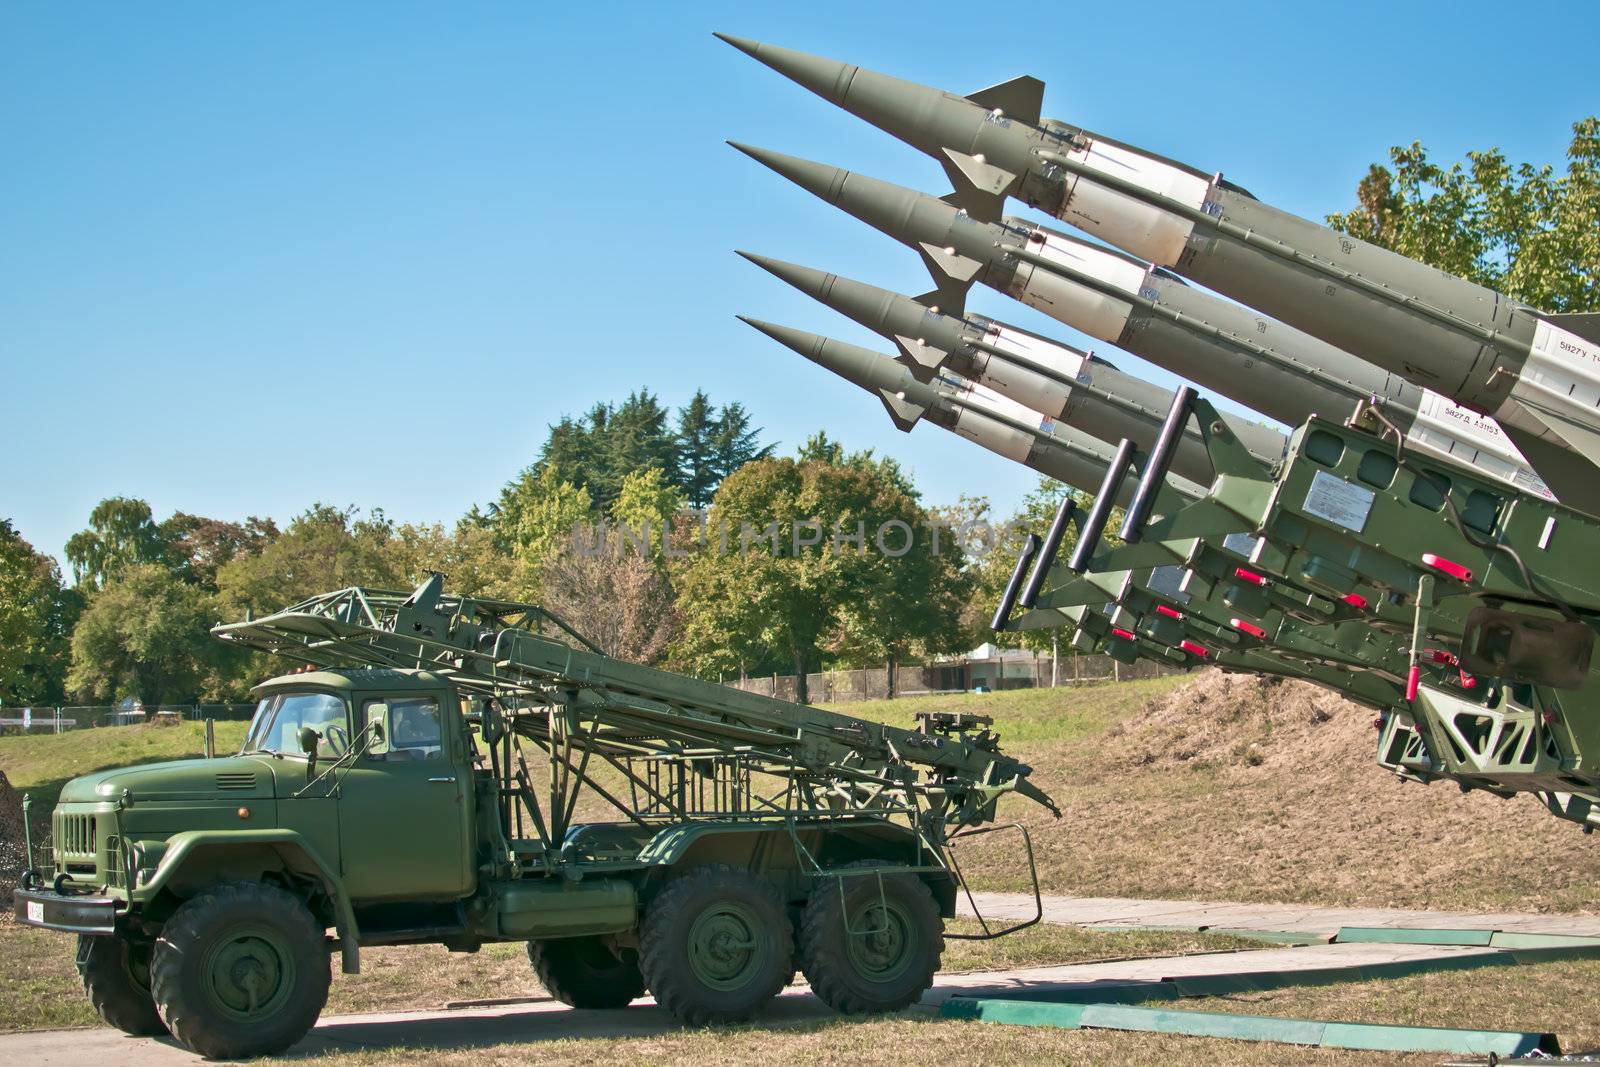 Several combat missiles aimed at the sky by vician